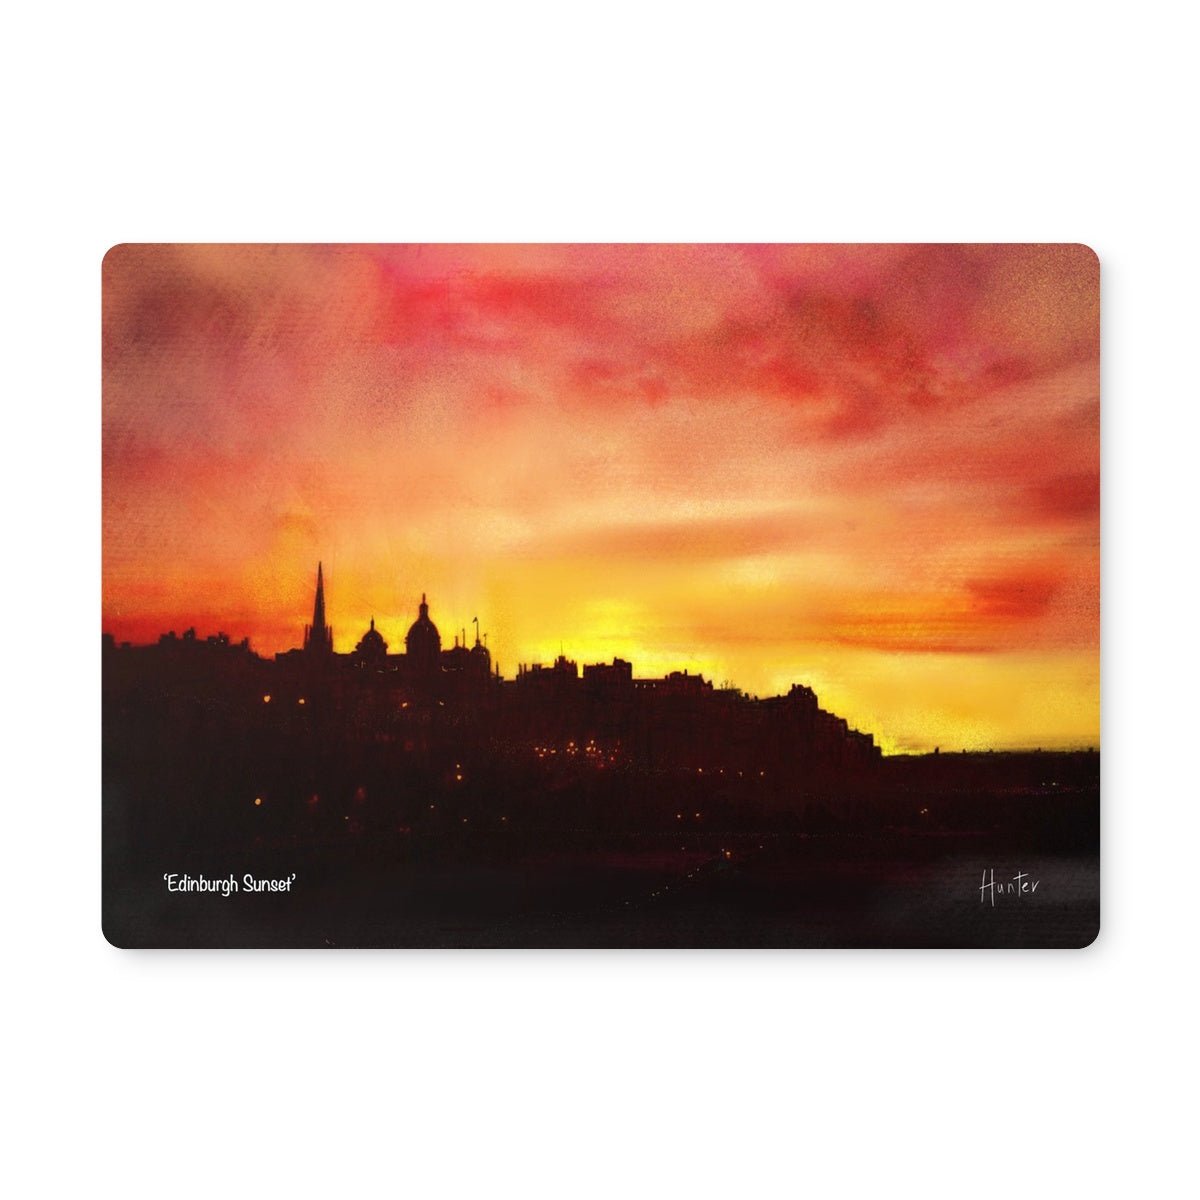 Edinburgh Sunset Art Gifts Placemat-Placemats-Edinburgh & Glasgow Art Gallery-4 Placemats-Paintings, Prints, Homeware, Art Gifts From Scotland By Scottish Artist Kevin Hunter